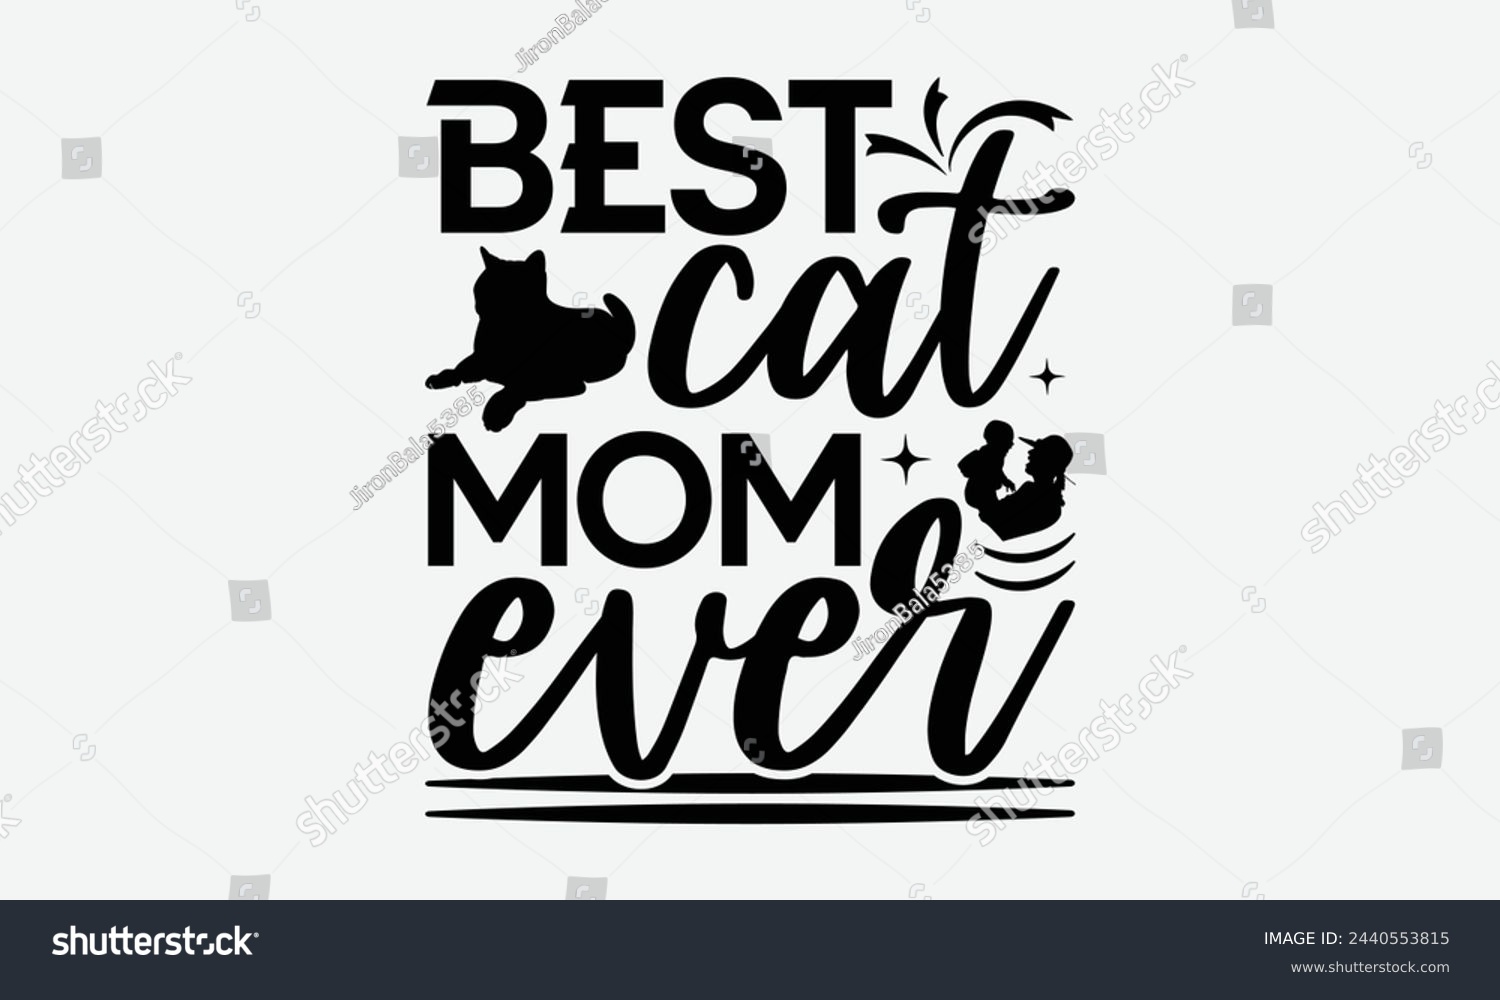 SVG of Best cat mom ever - MOM T-shirt Design,  Isolated on white background, This illustration can be used as a print on t-shirts and bags, cover book, templet, stationary or as a poster. svg